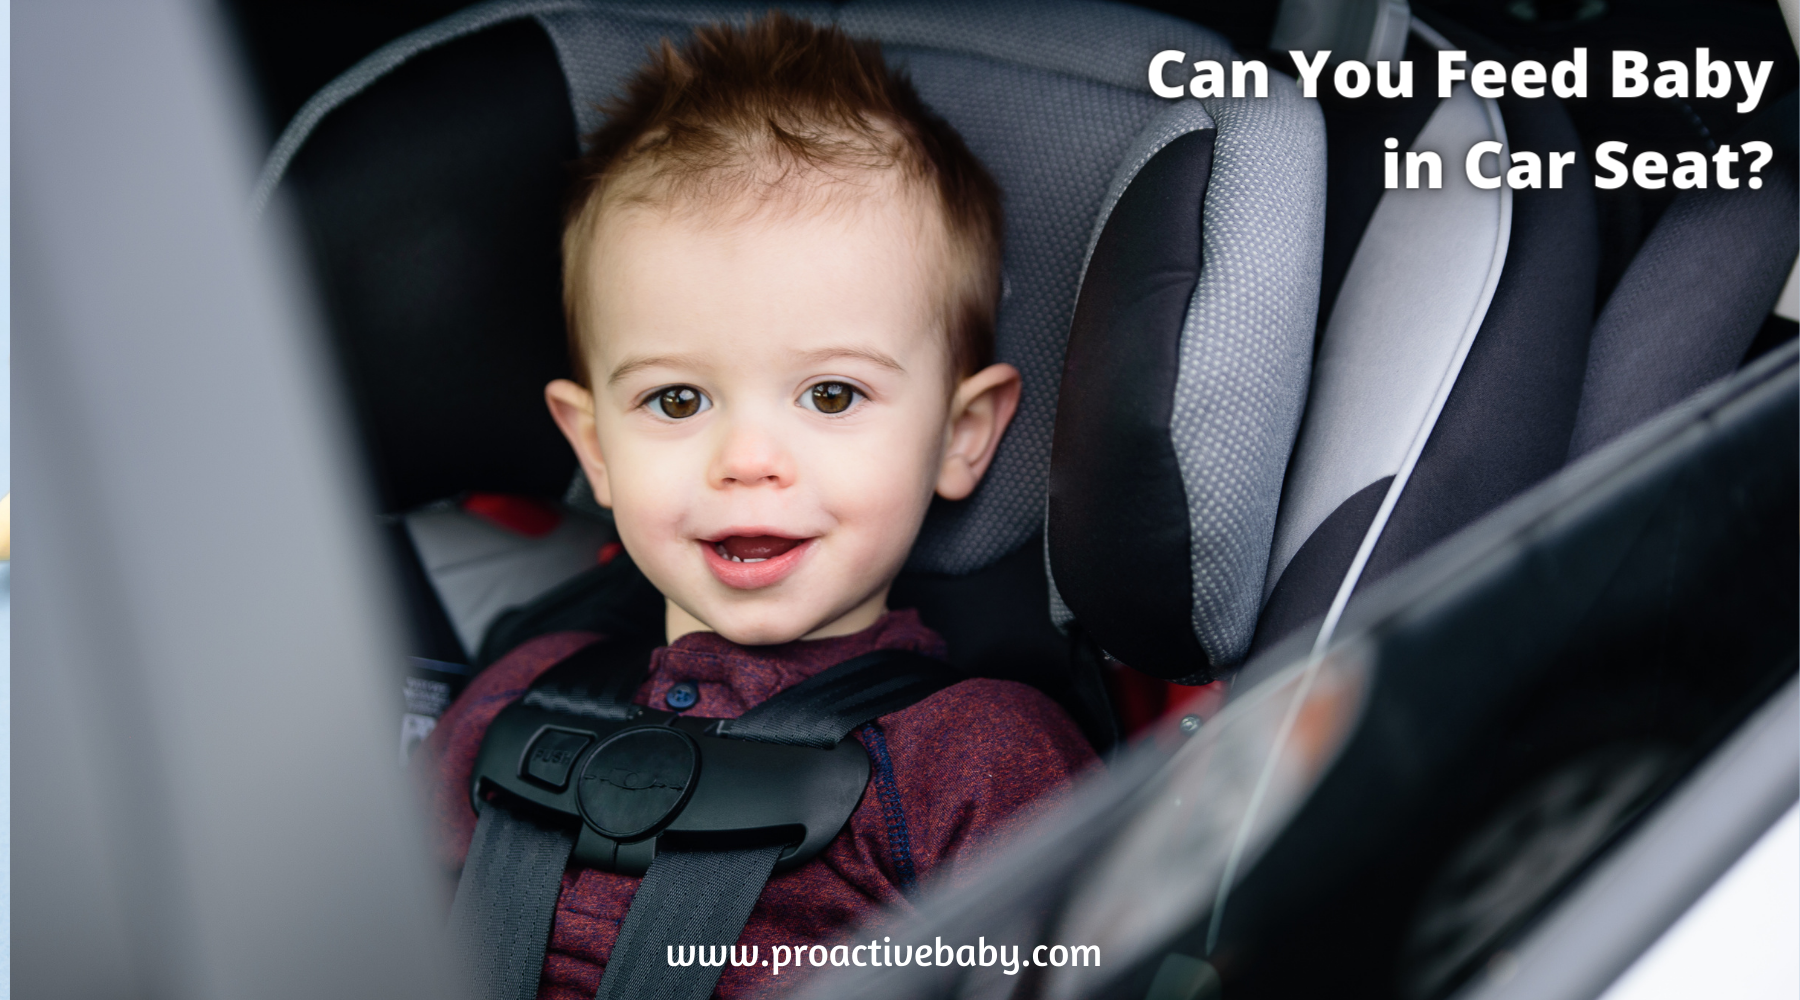 Can You Feed Baby in Car Seat?